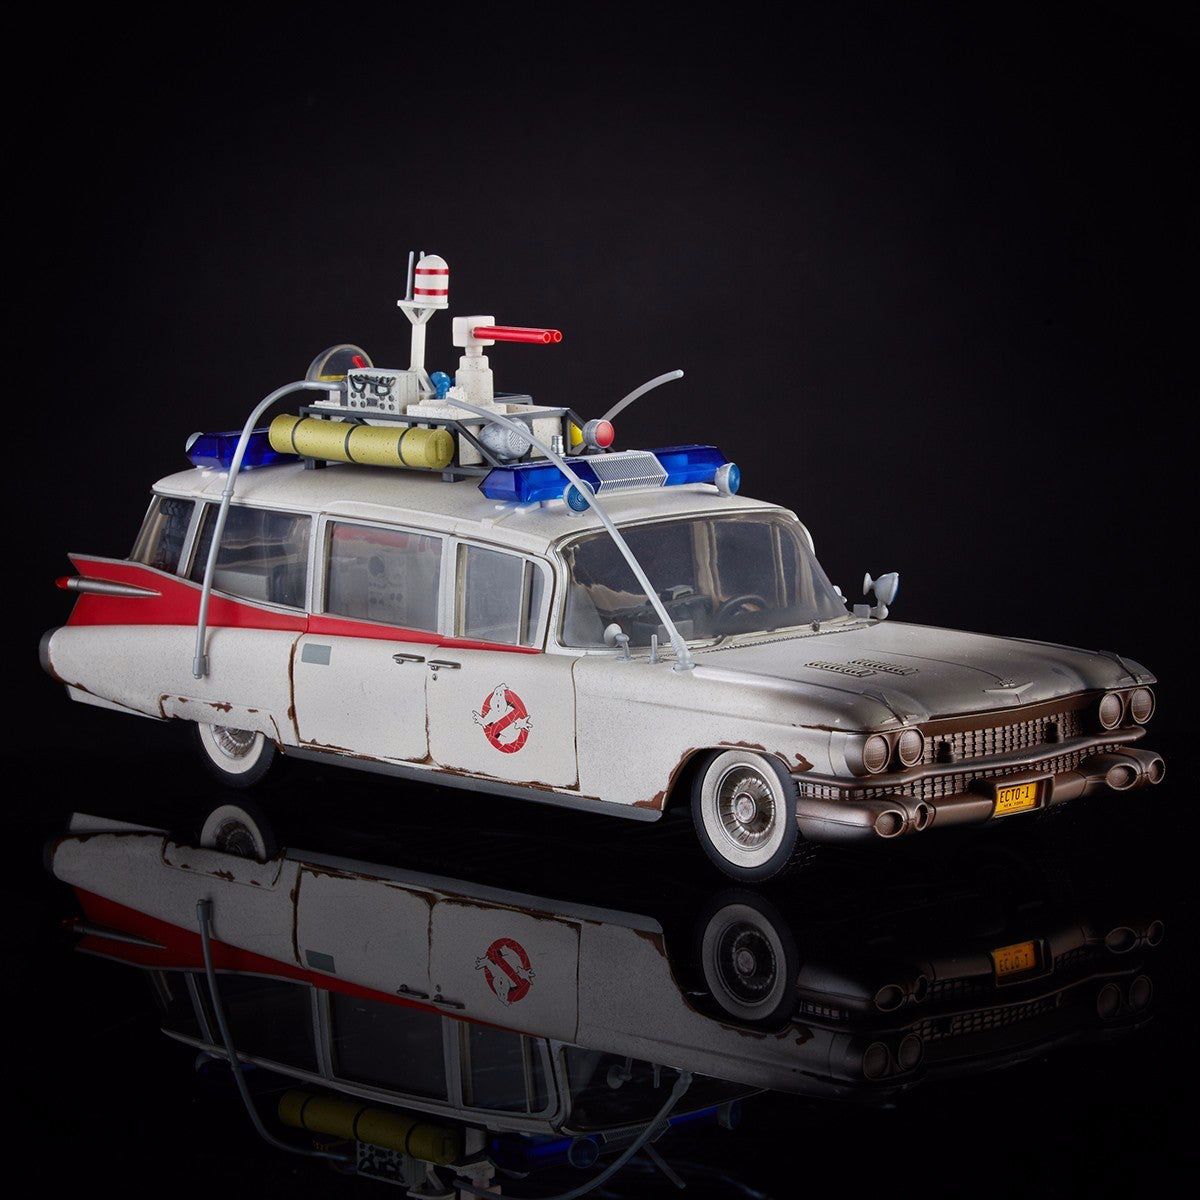 Ghostbusters Afterlife Ecto 1 Toy images #2